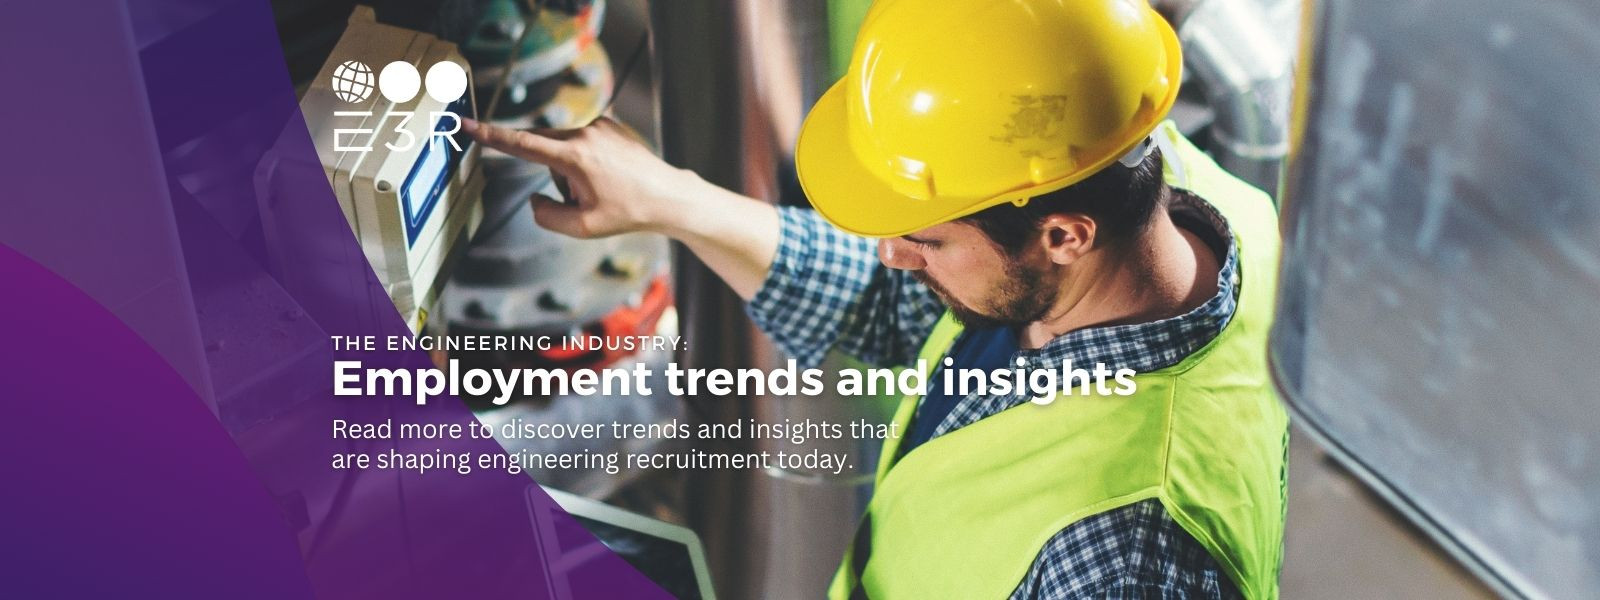 Engineering Recruitment: Trends, insights and oppo...